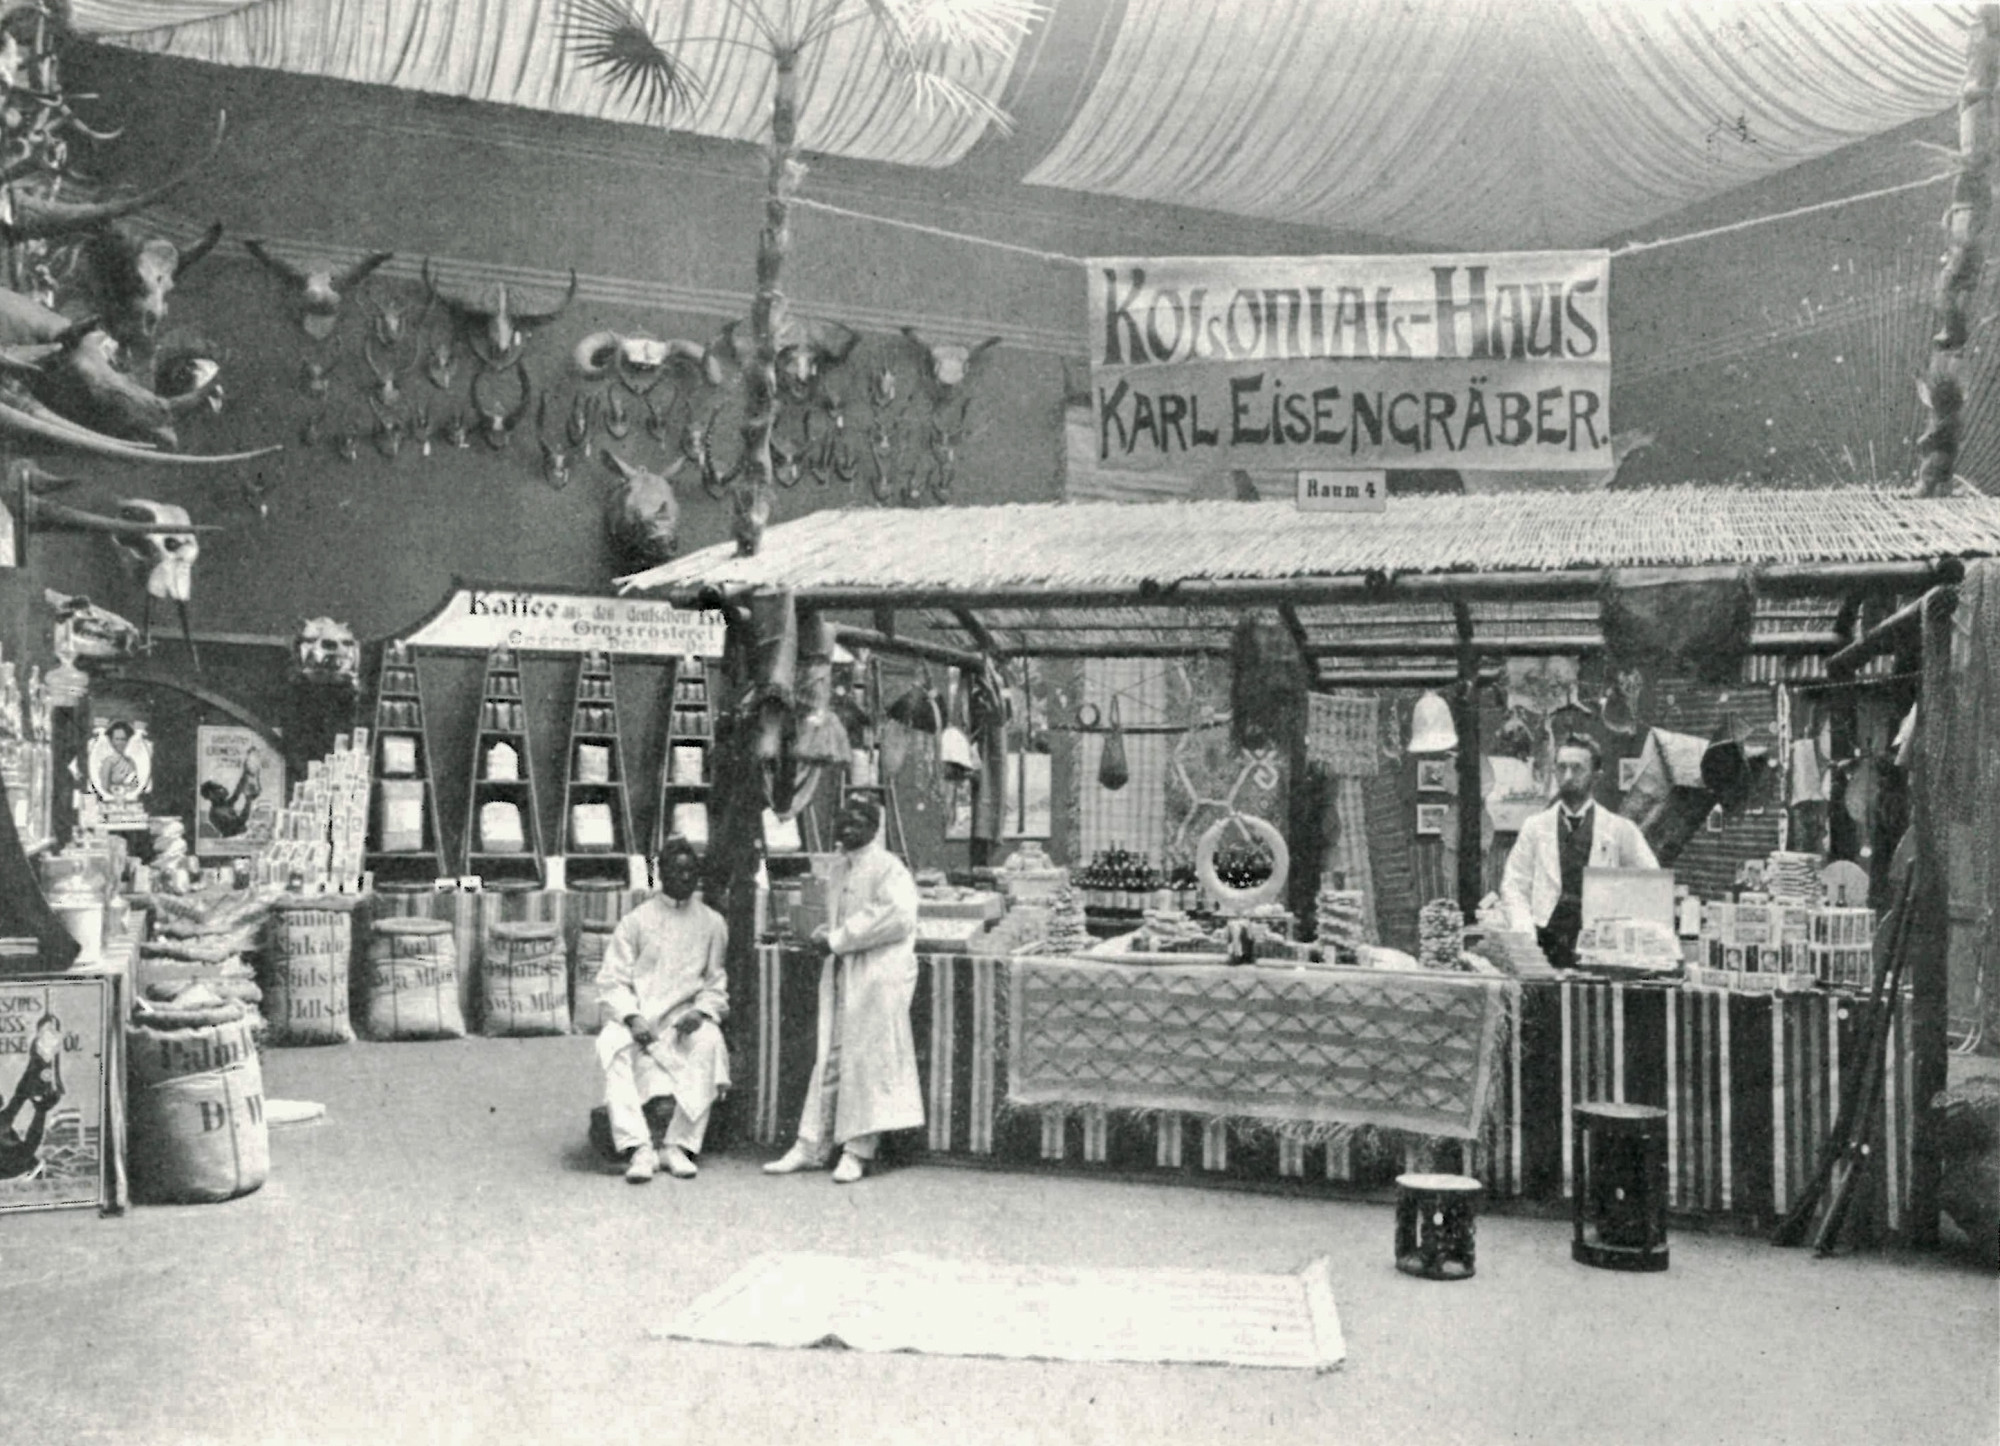 Black and white photograph of an exhibition room. Above a stand with various products like fabrics, crafted objects, and coffee, among other things, hangs a banner, advertising the “Kolonial-Haus Karl Eisengräber”. One white man is standing at the right corner behind the stand, two black men stand on the left side of the stand.
On the left wall are hanged animal skulls with horns of various sizes, below which are displayed several commercial products, such as coffee beans.